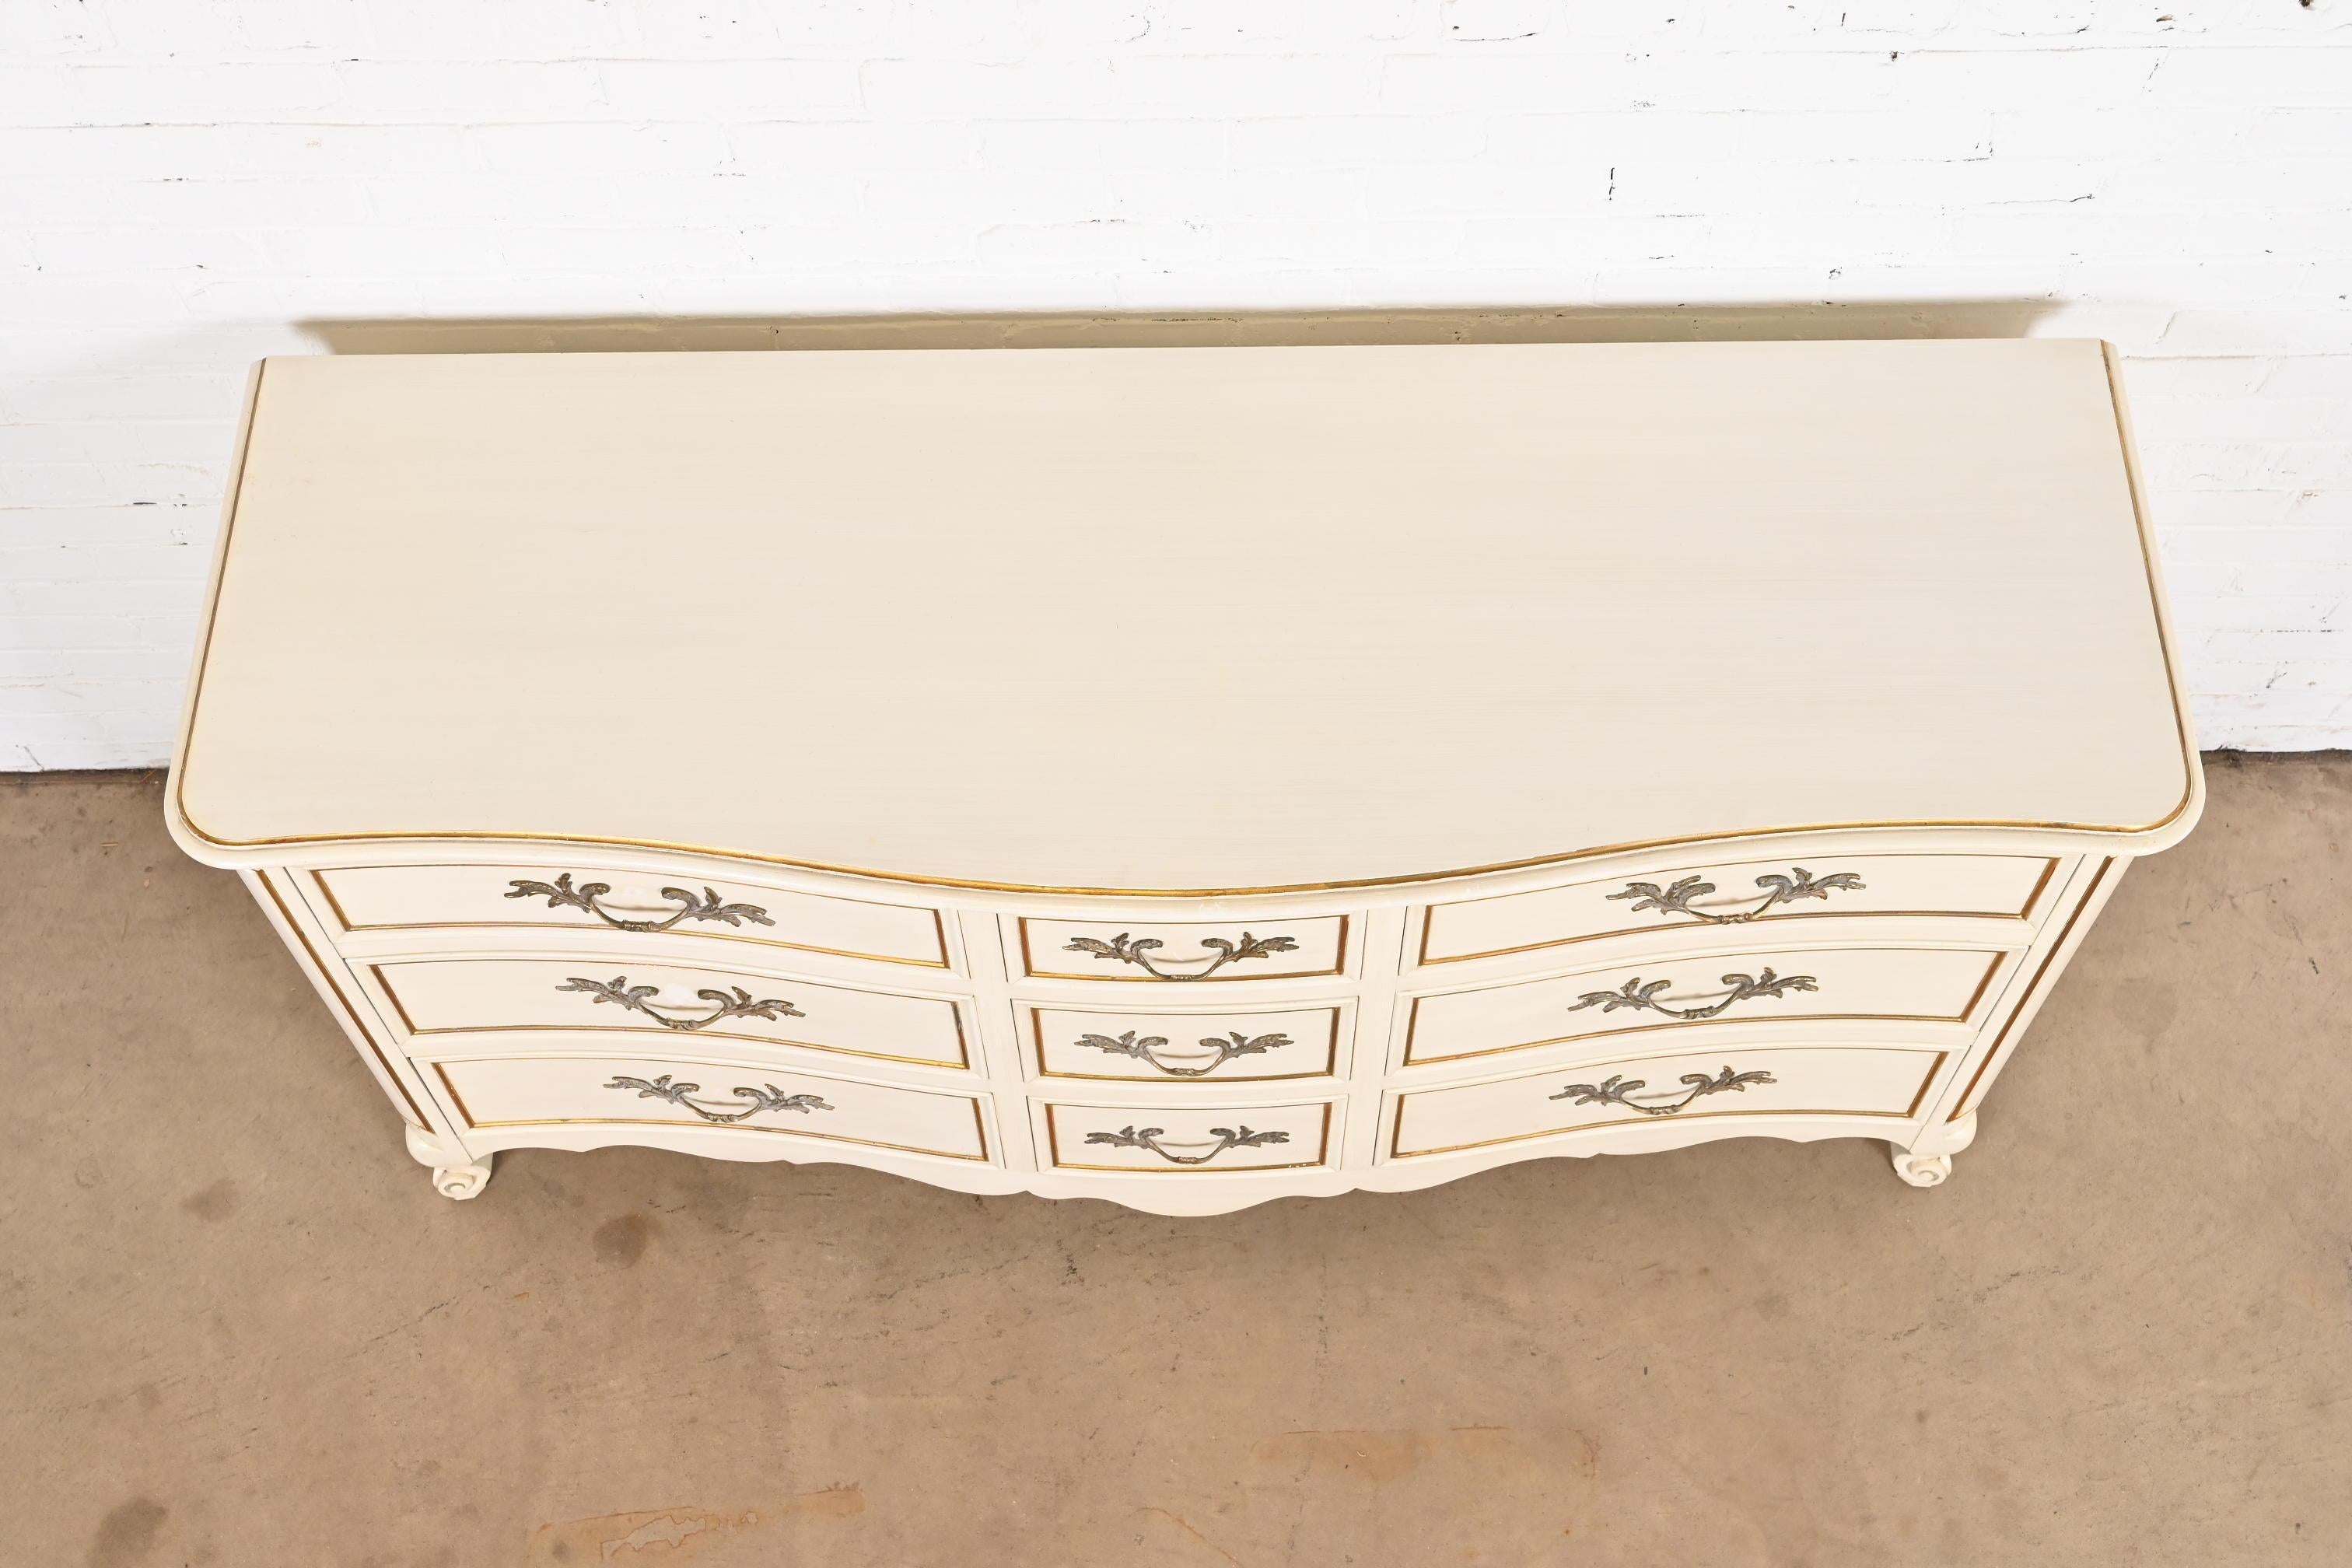 Kindel Furniture French Provincial Louis XV Triple Dresser, circa 1960s For Sale 9